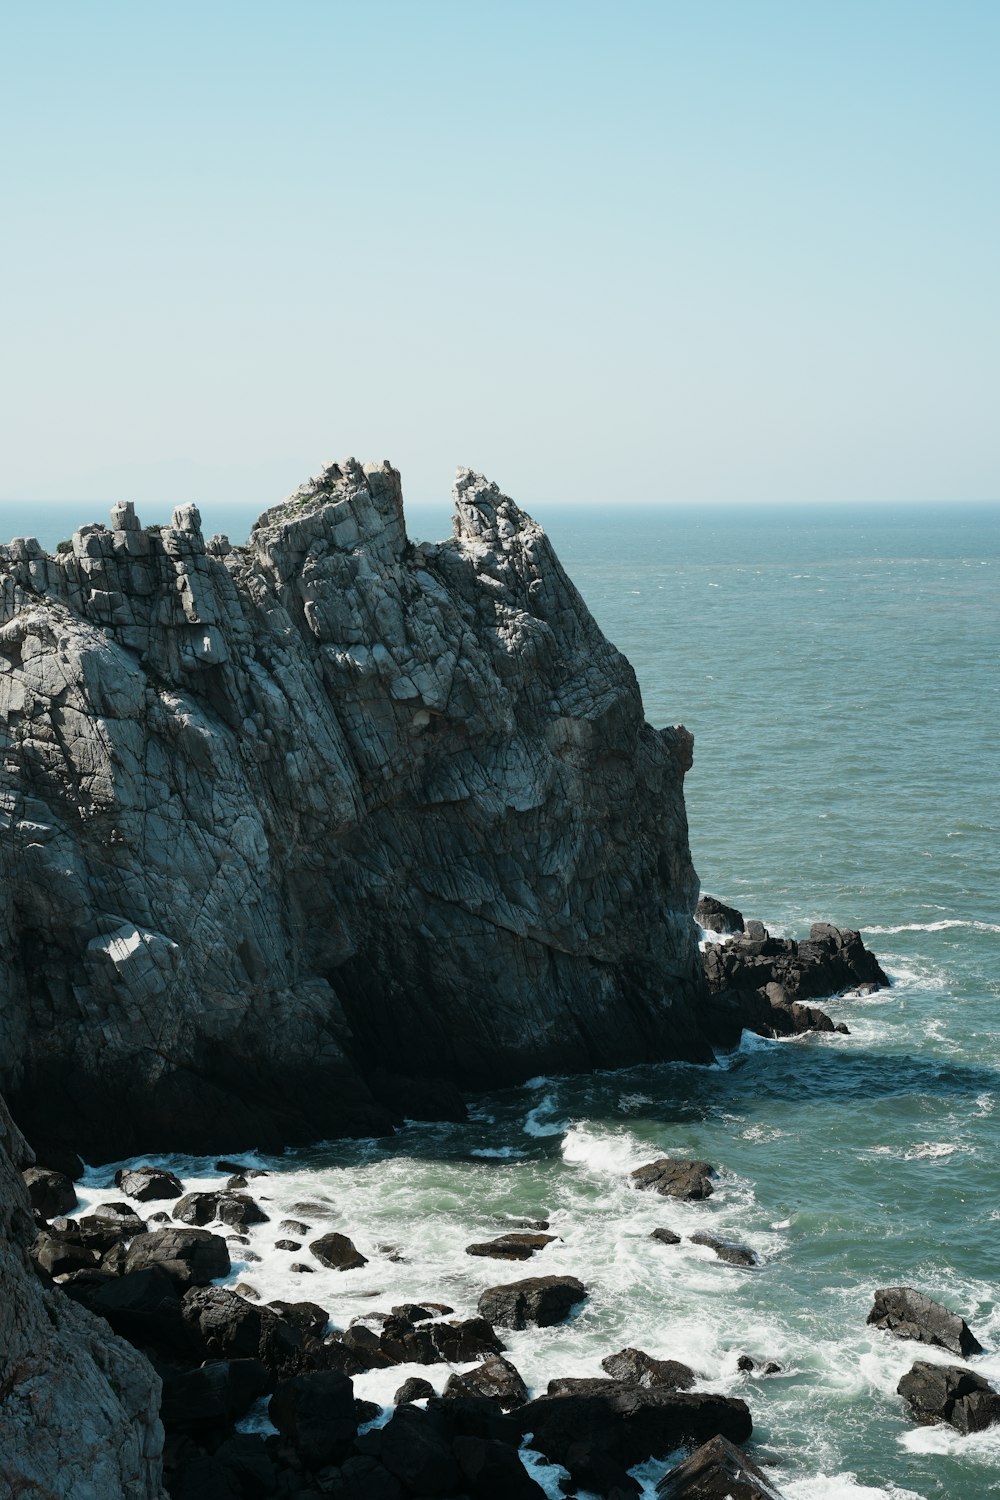 a large rock outcropping next to the ocean